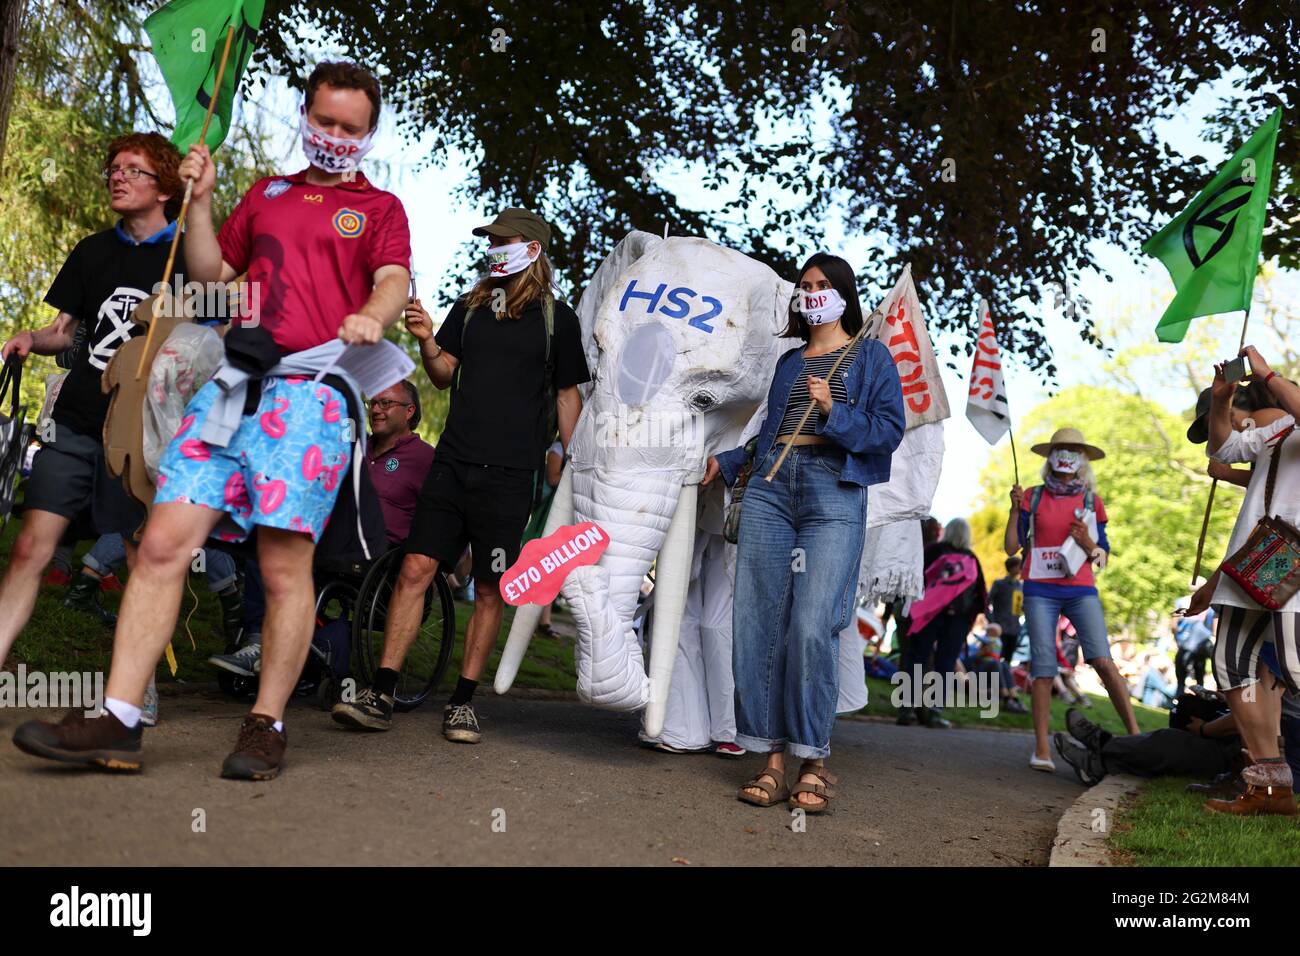 Extinction Rebellion activists attend a demonstration at Kimberley Park in Falmouth, during the G7 summit, in Cornwall, Britain, June 12, 2021. REUTERS/Tom Nicholson Stock Photo